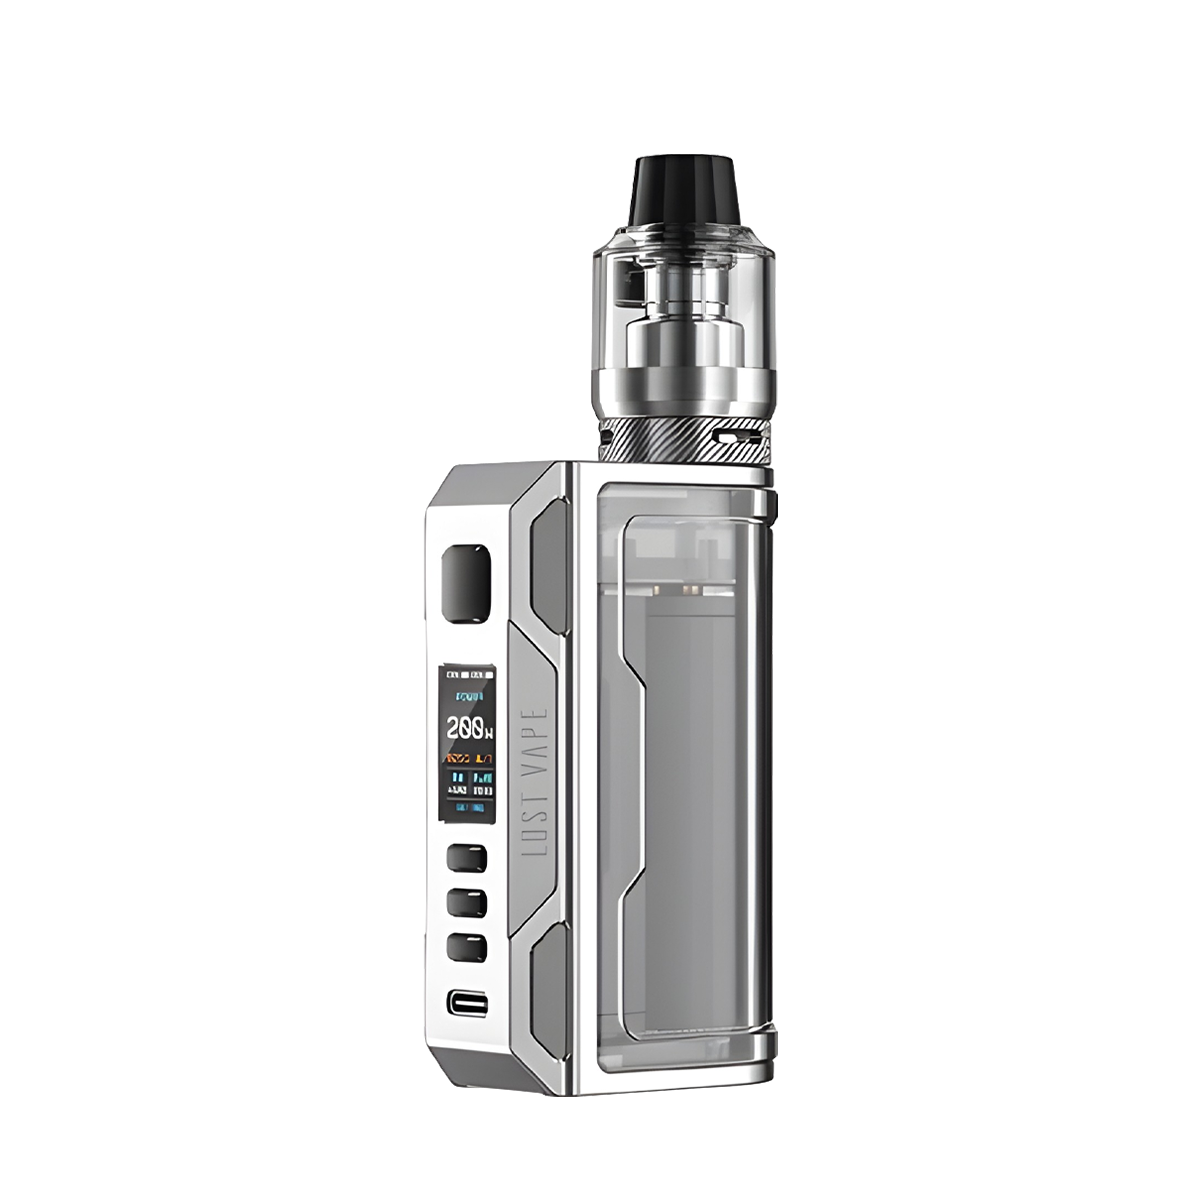 Lost Vape Thelema Quest 200W Advanced Mod Kit Transparemt Clear Series/Stainless Steel  